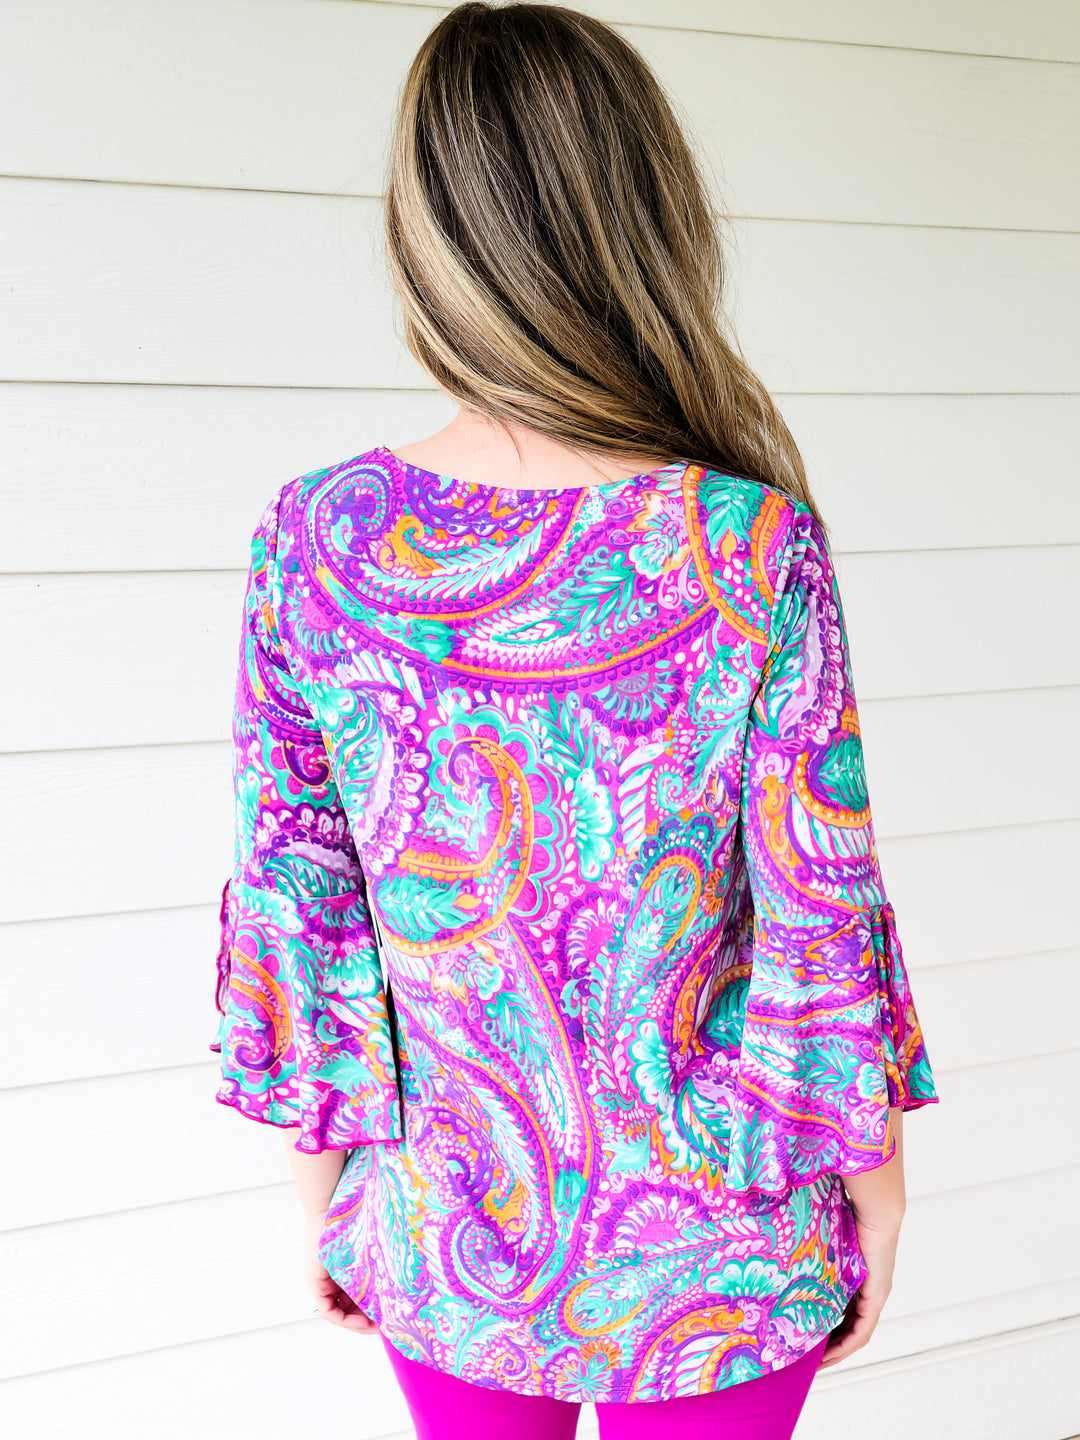 DEAR SCARLETT STRETCHY TIE FRONT TOP 3/4 SLEEVES - TEAL PURPLE PAISLEY